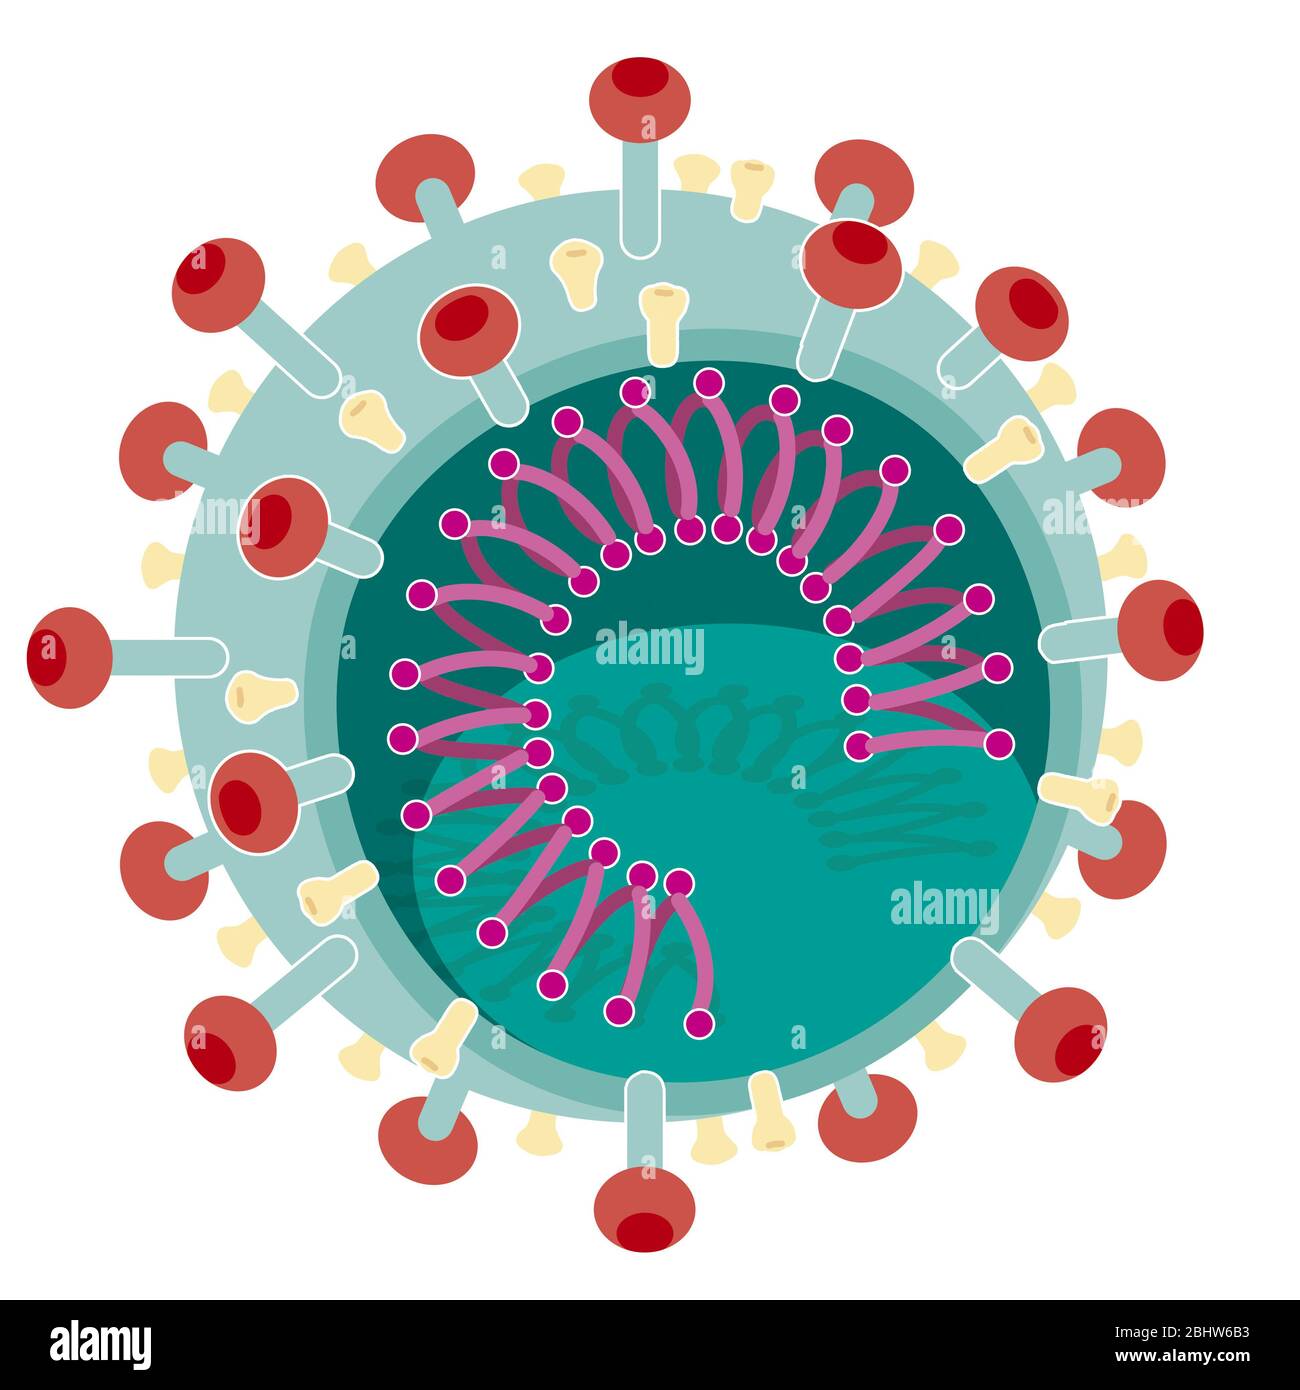 Coronavirus, SARS-COV2, pandemic 2020. The coronavirus which rages in 2020 is called SARS-COV2. This virus is made up of viral proteins. The one with Stock Photo